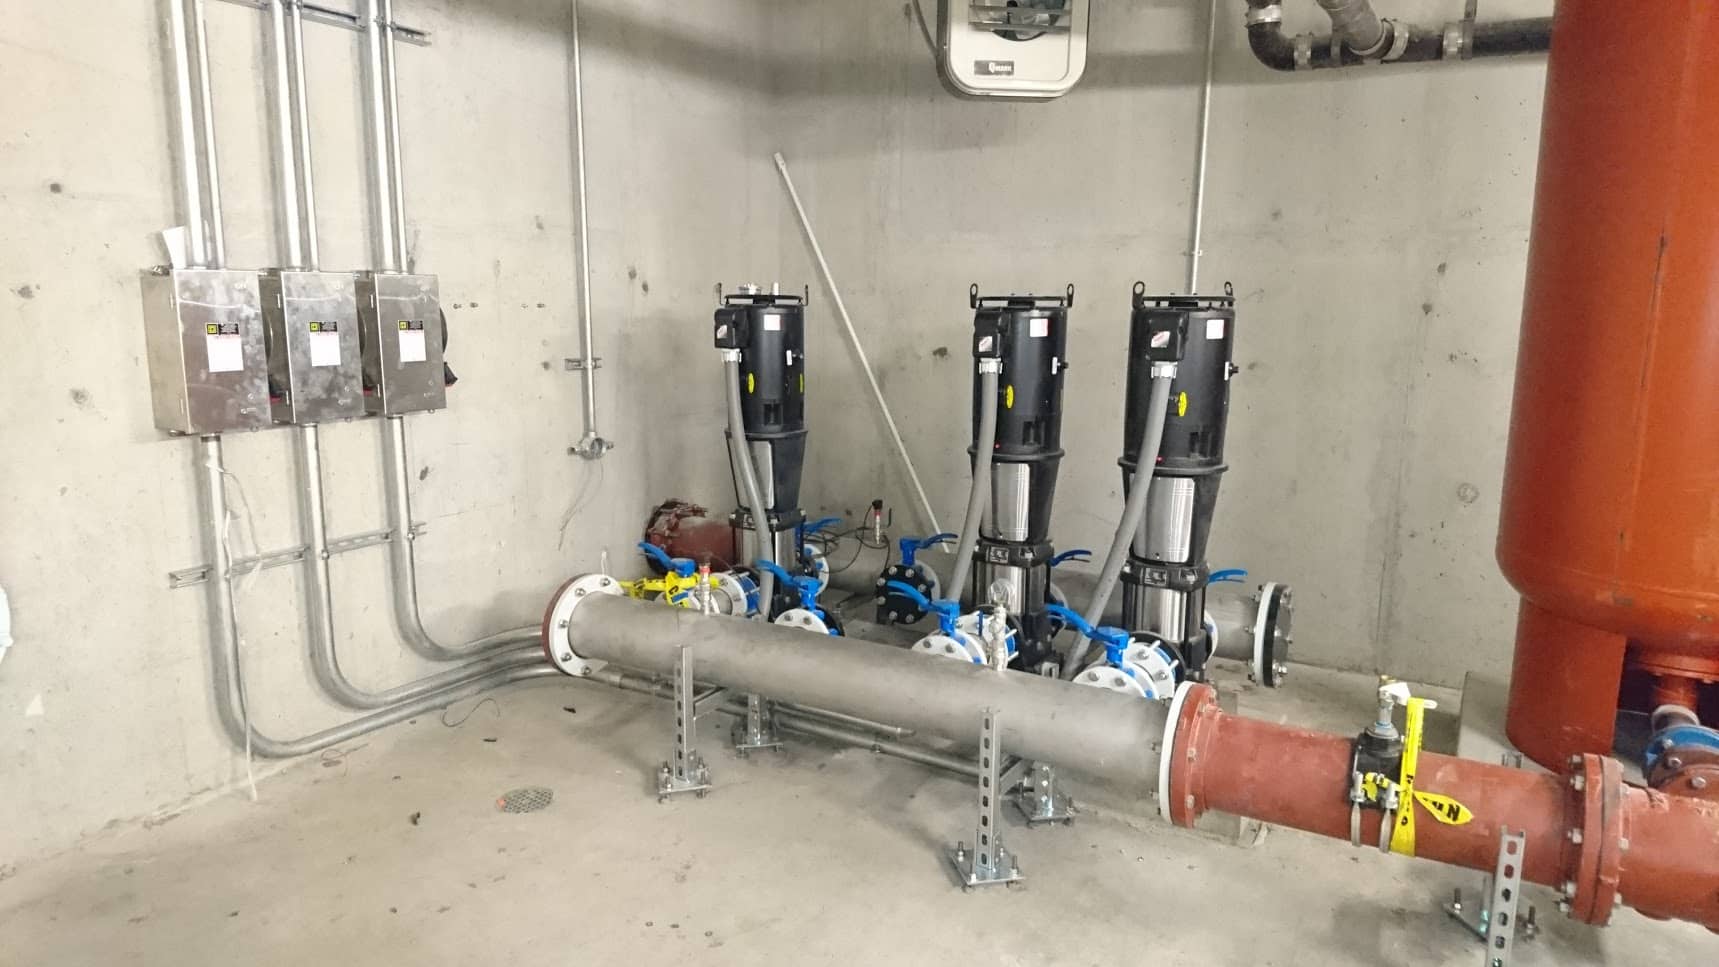 Large pipe and three electrical boxes installed inside concrete room